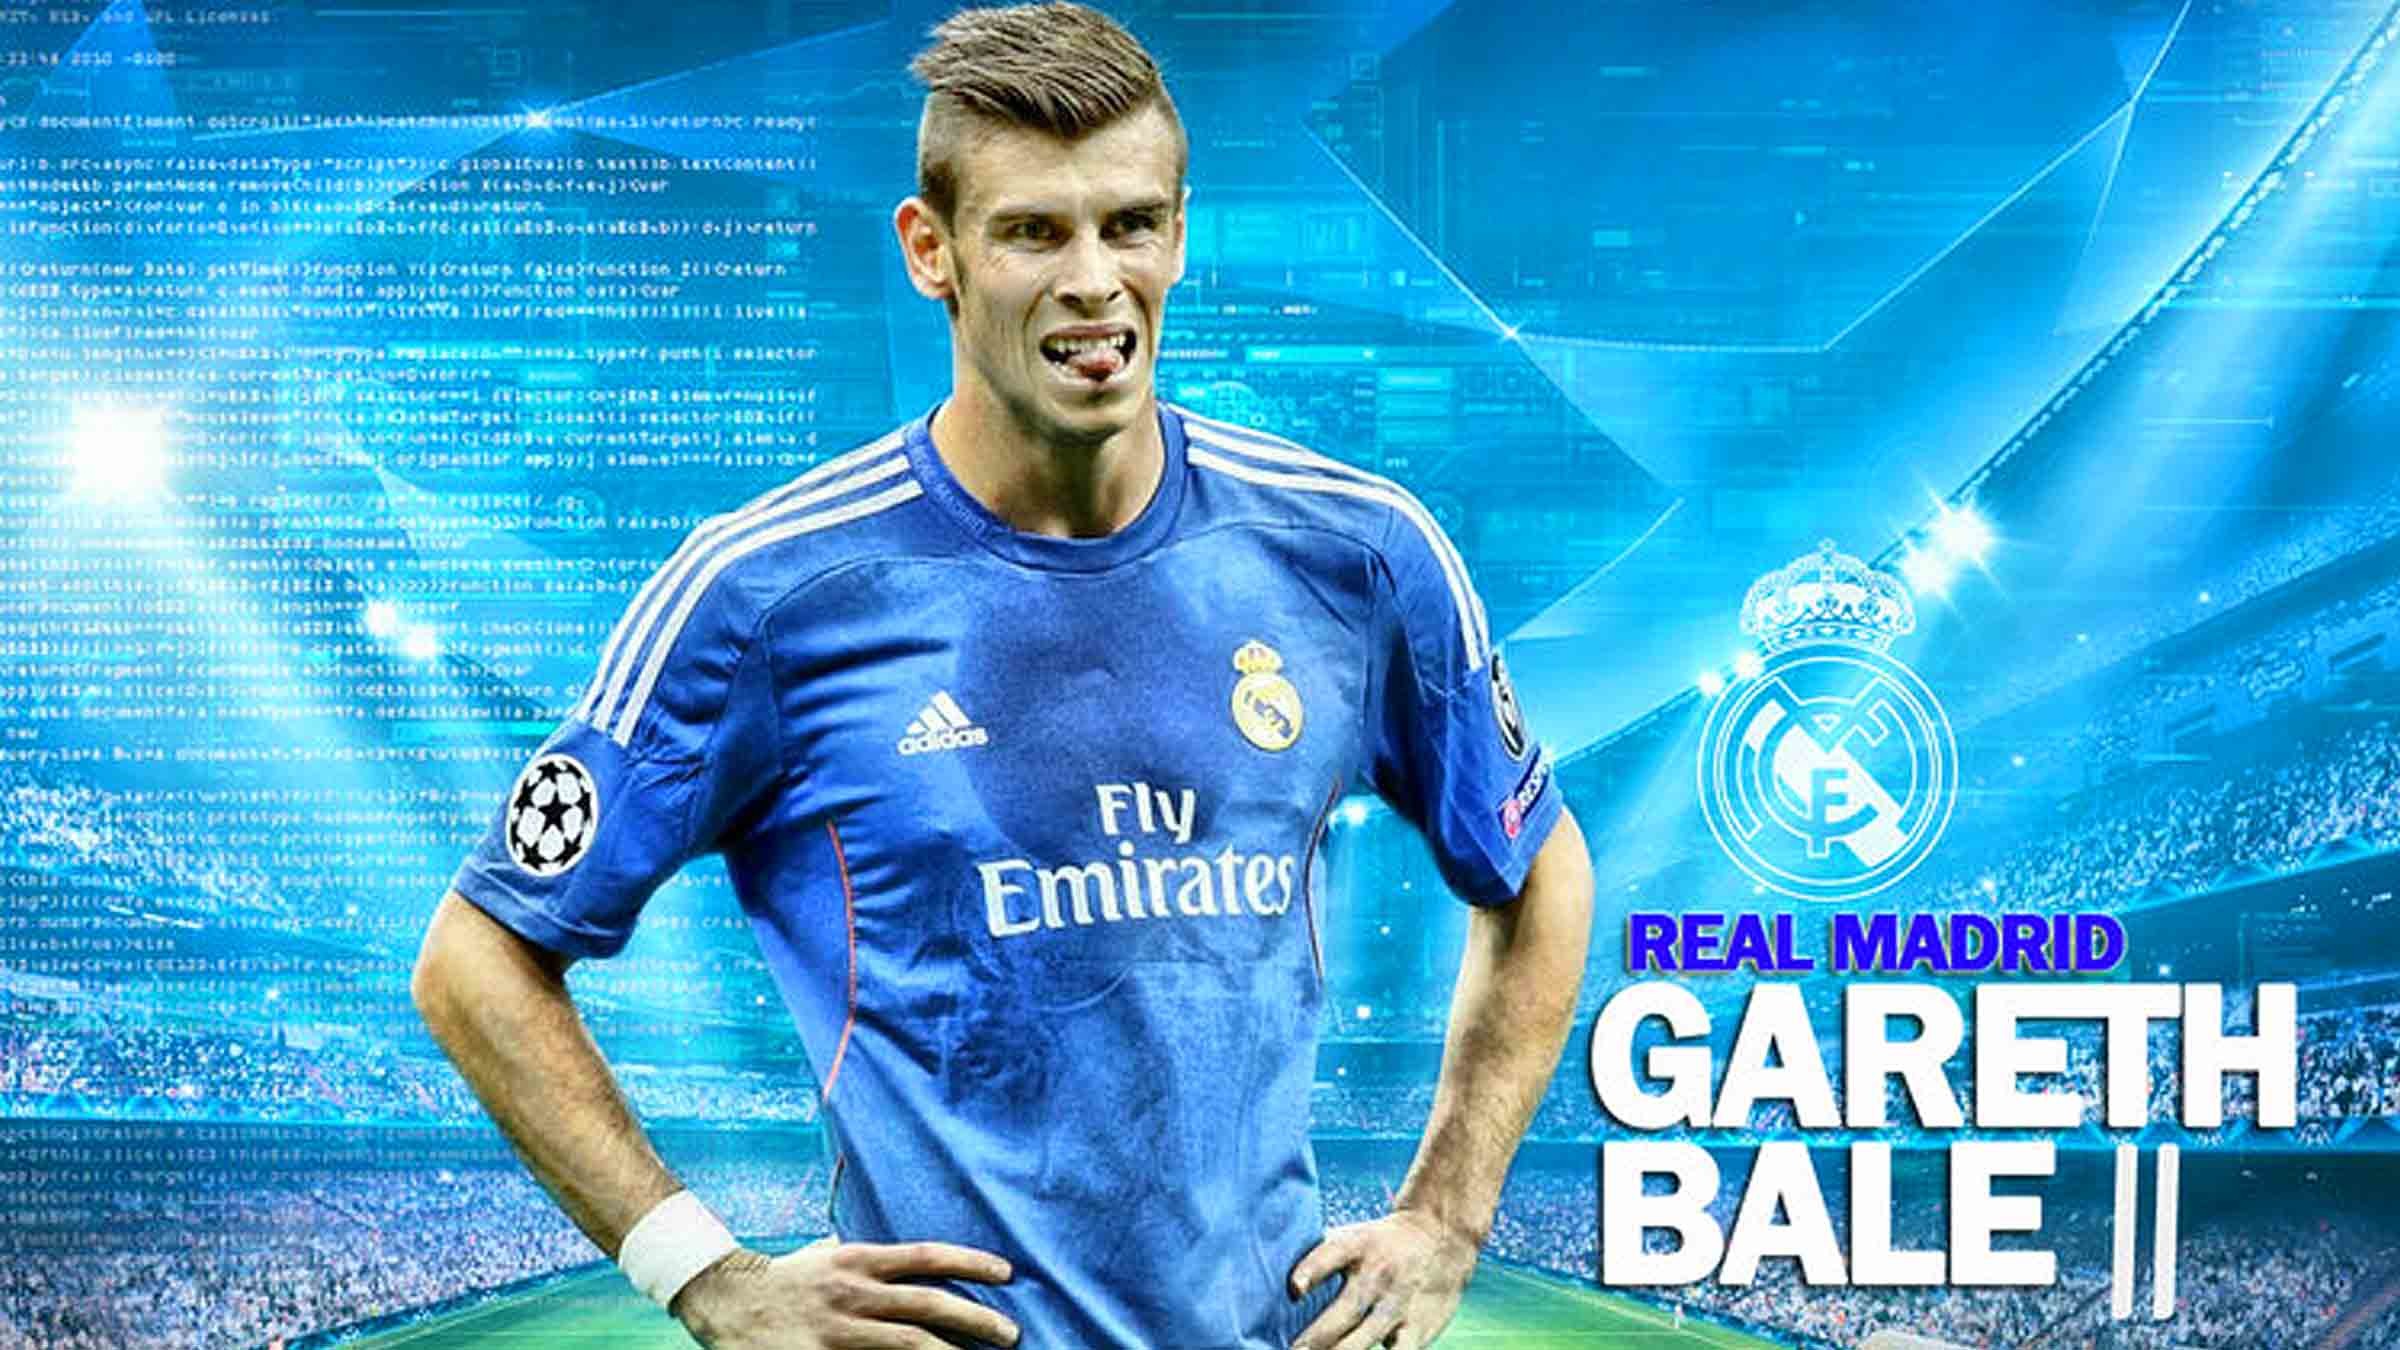 Football Legends » iPhone Wallpapers: Gareth Bale (Real Madrid C.F.)